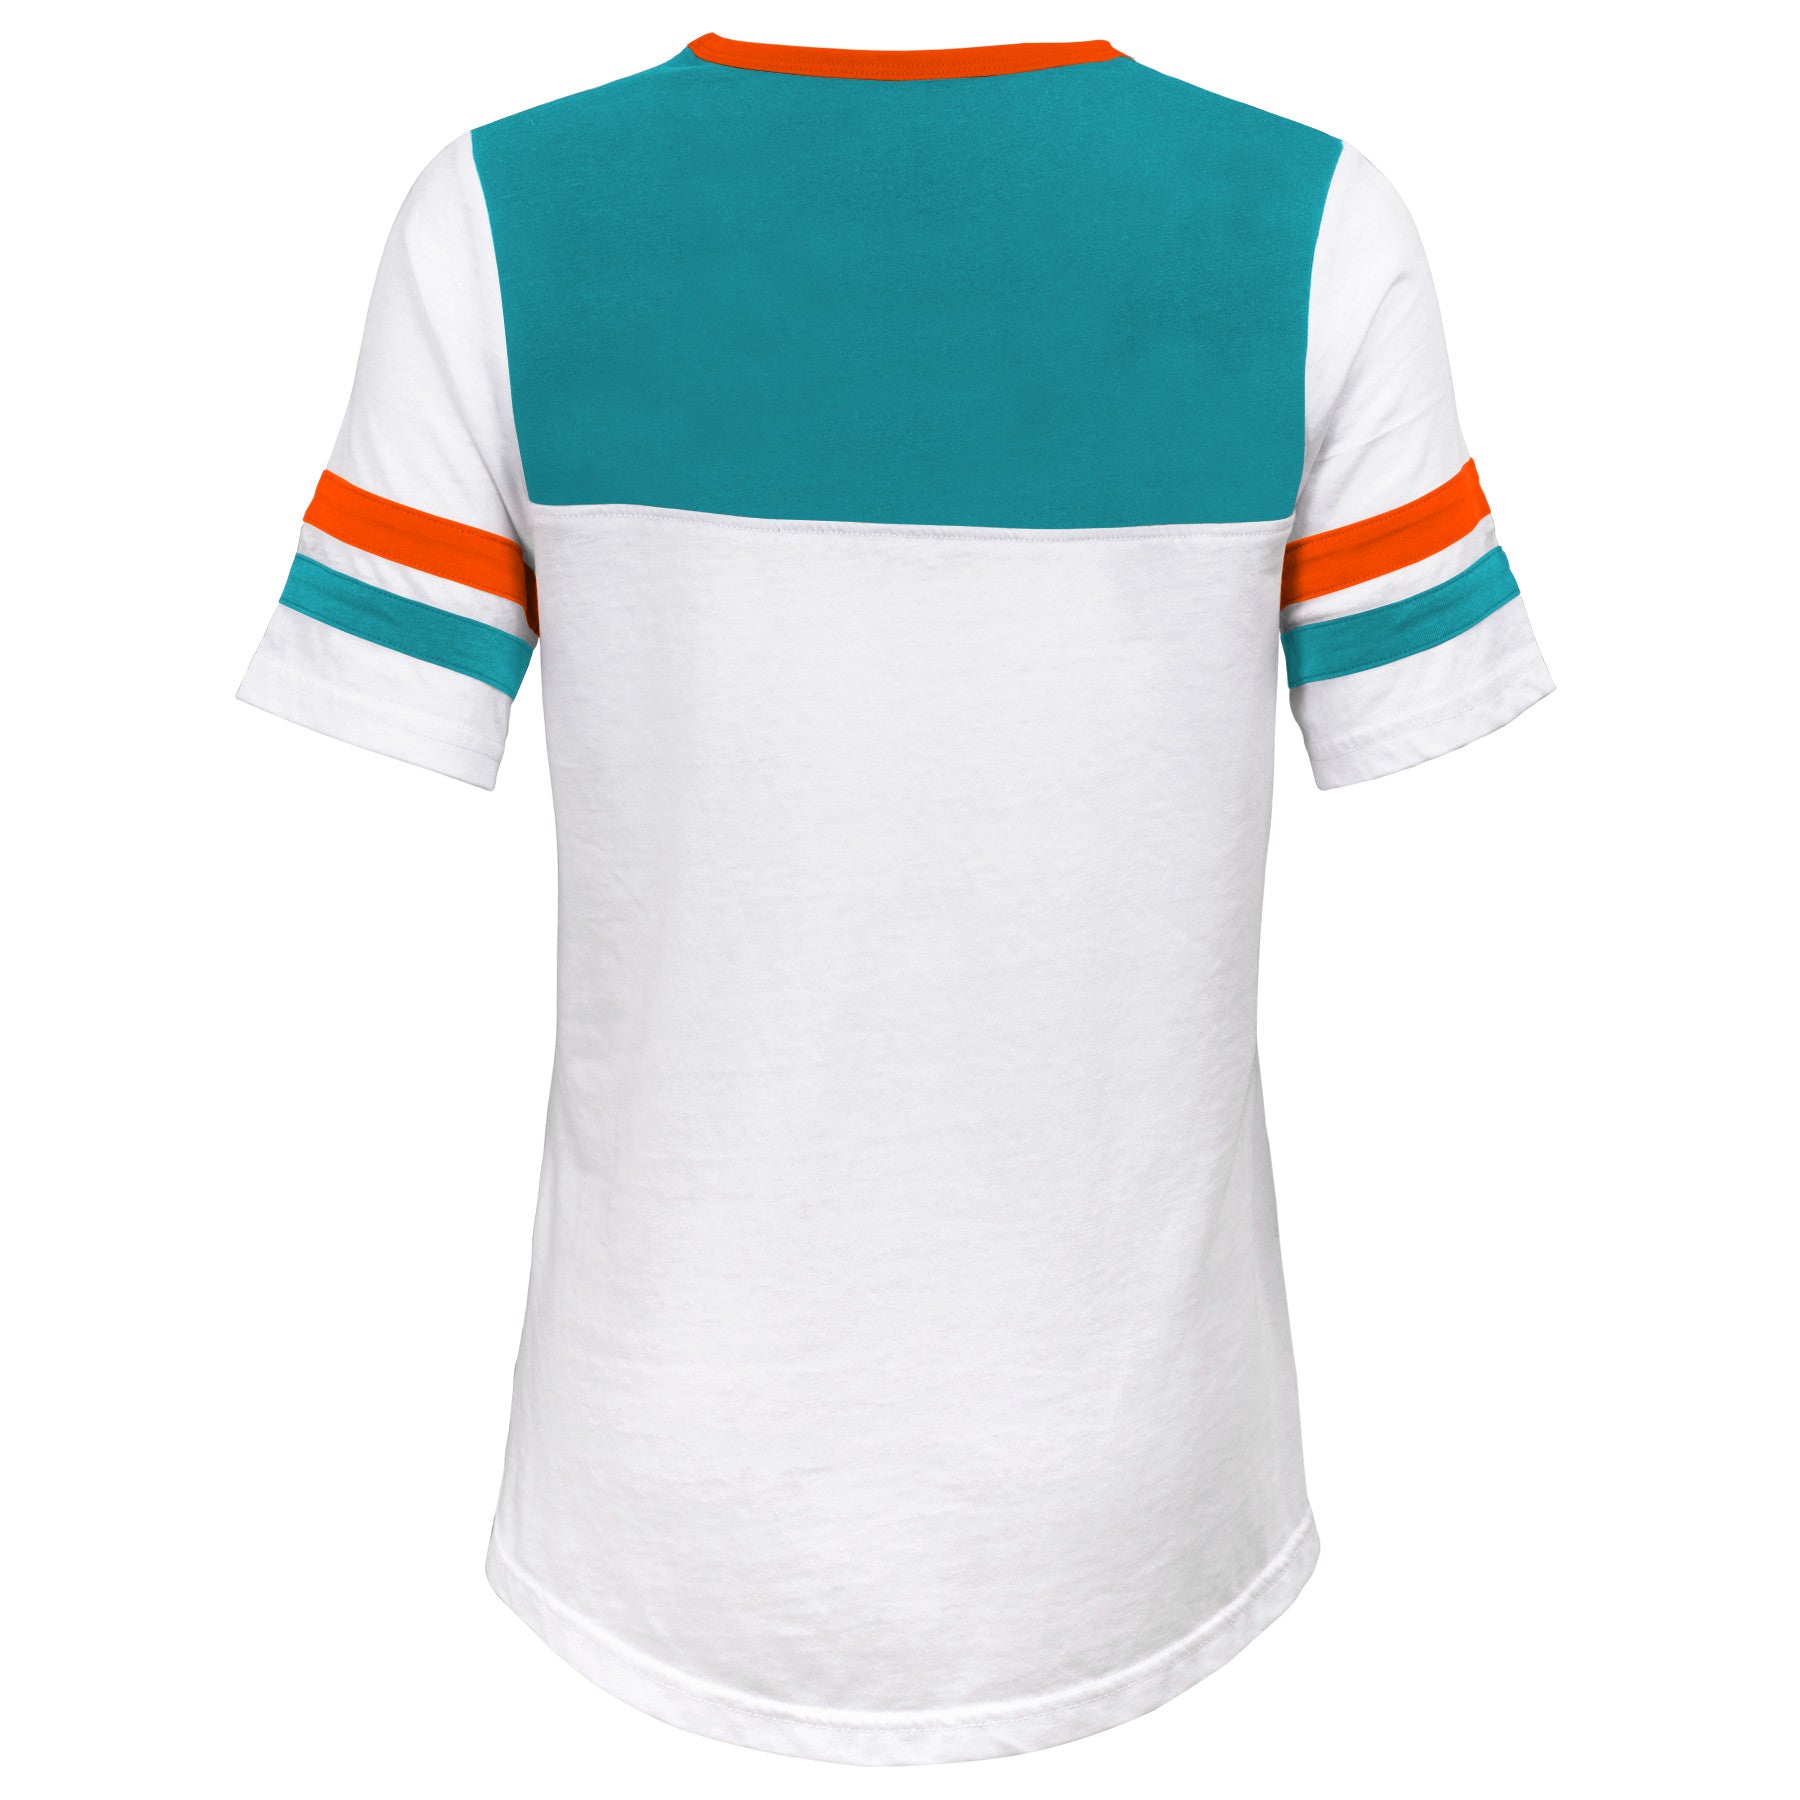 girls dolphins jersey